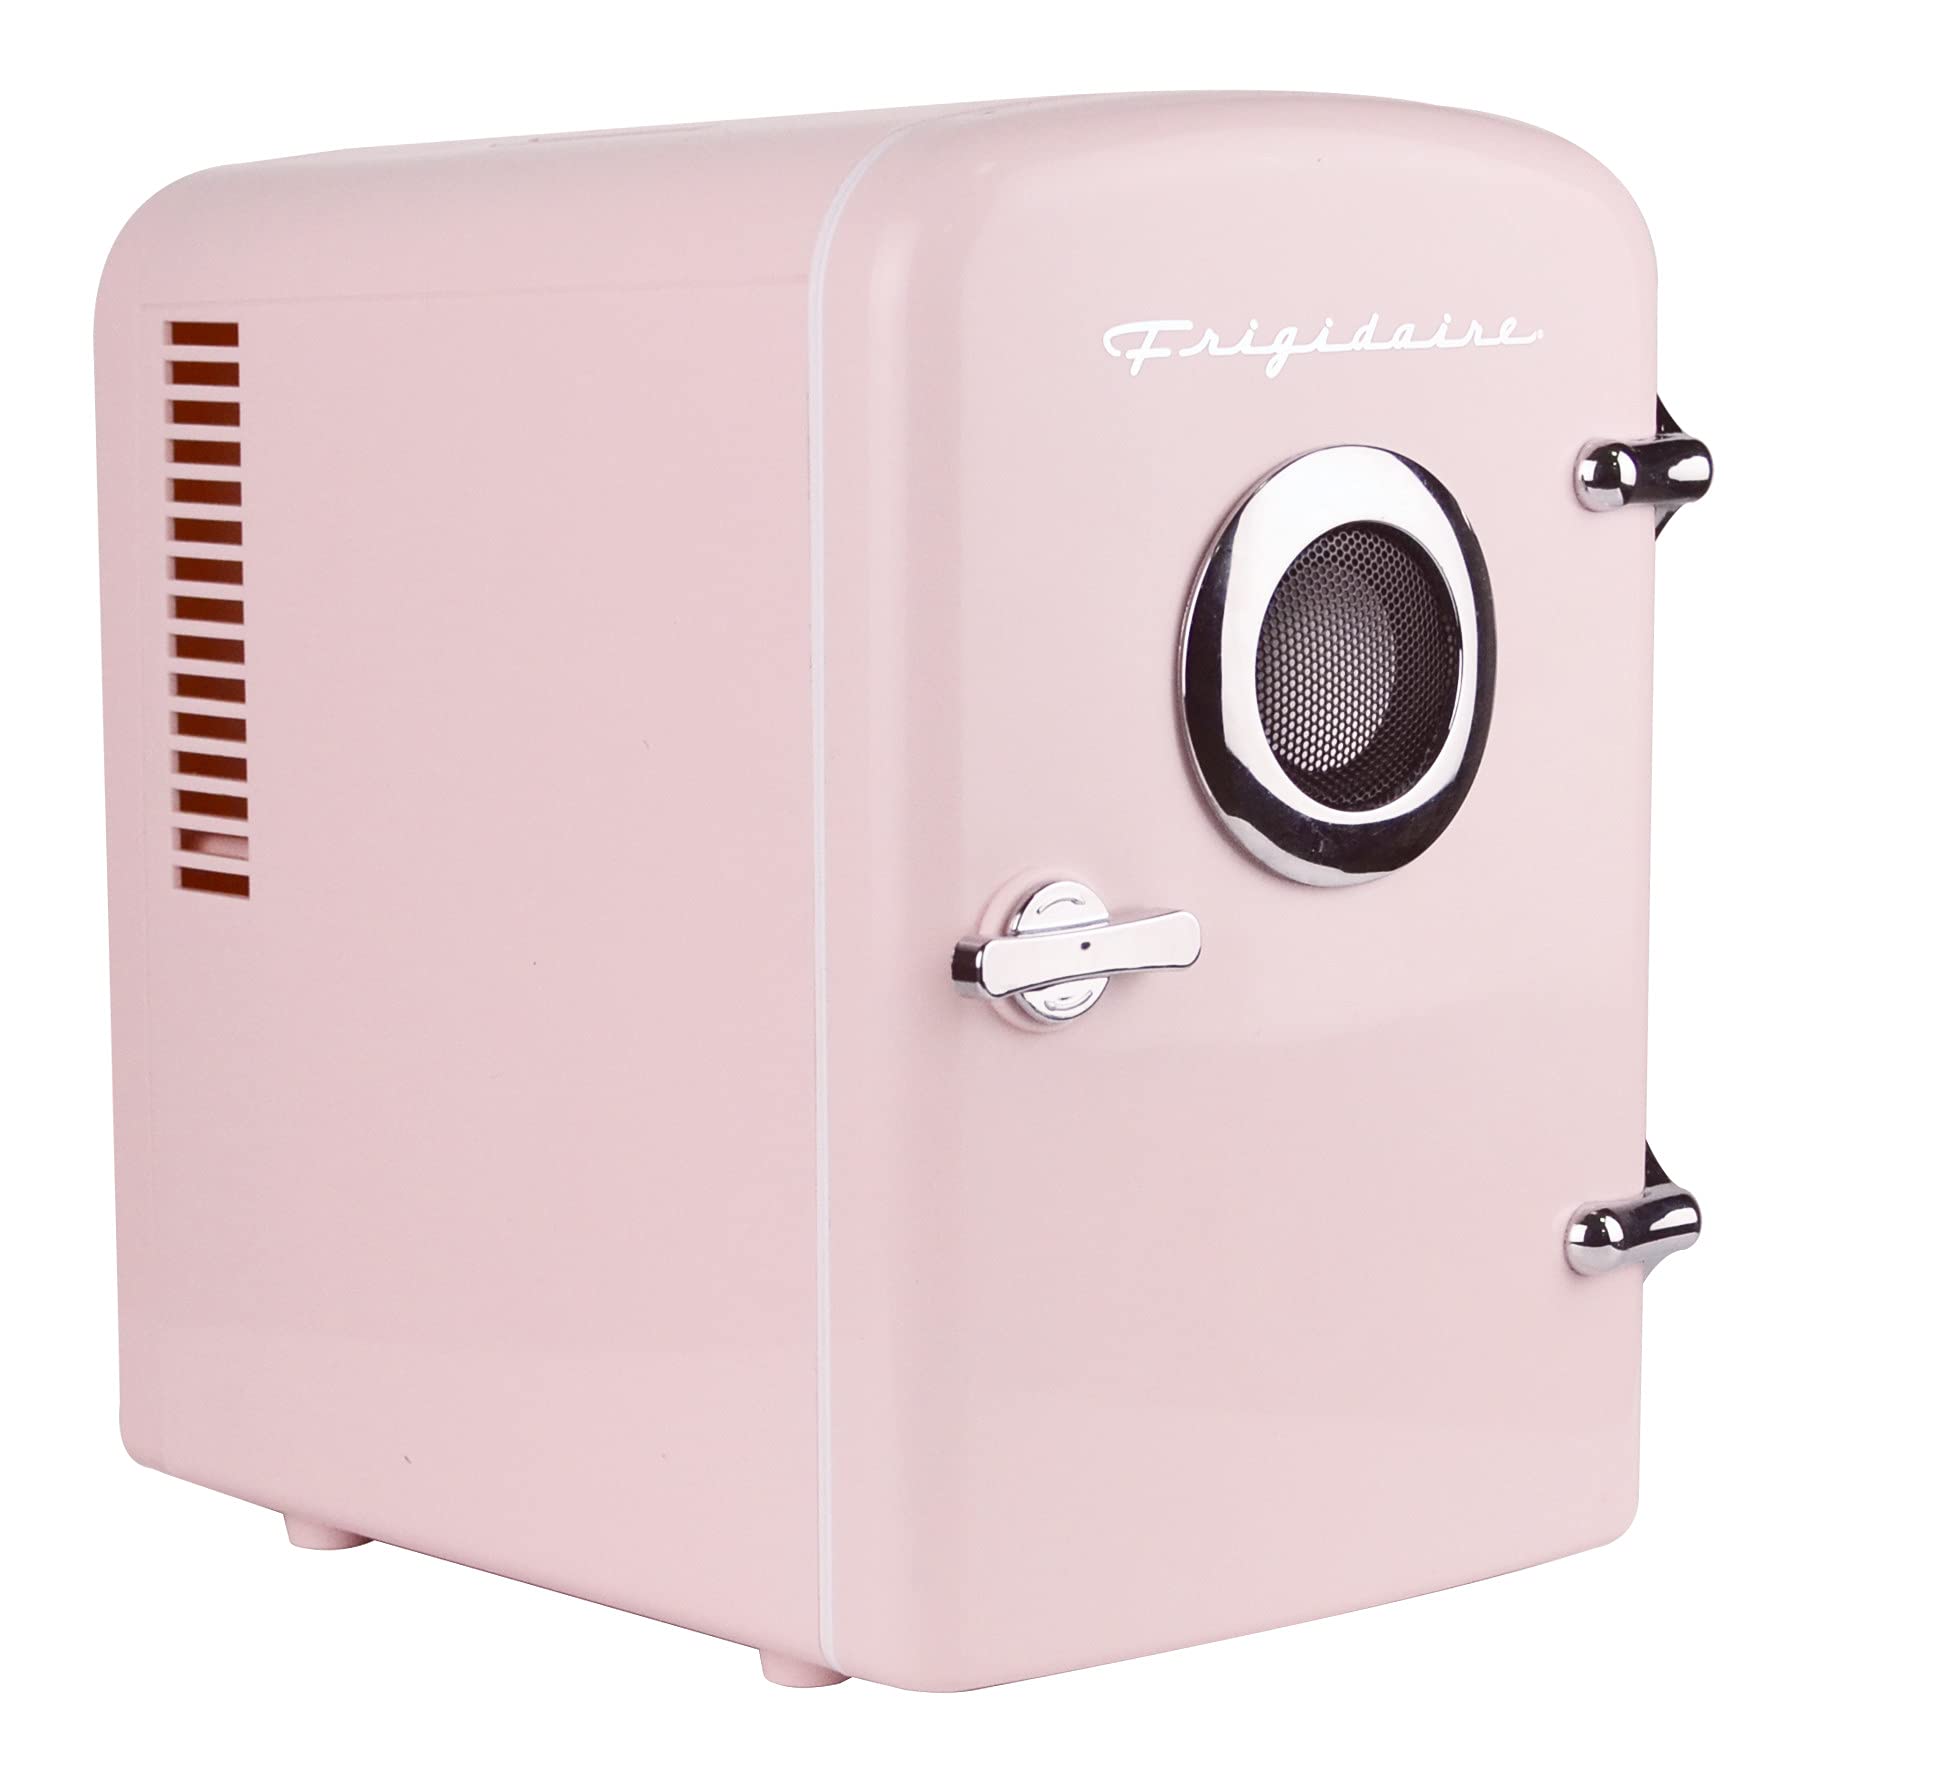 Frigidaire EFMIS151-PINK EFMIS151 Mini Portable Compact Personal Home Office Fridge Cooler Built in Speaker, 4L Capacity, Chills Six 12 oz Cans, 100% Freon-Free & Eco Friendly, standard, Pink